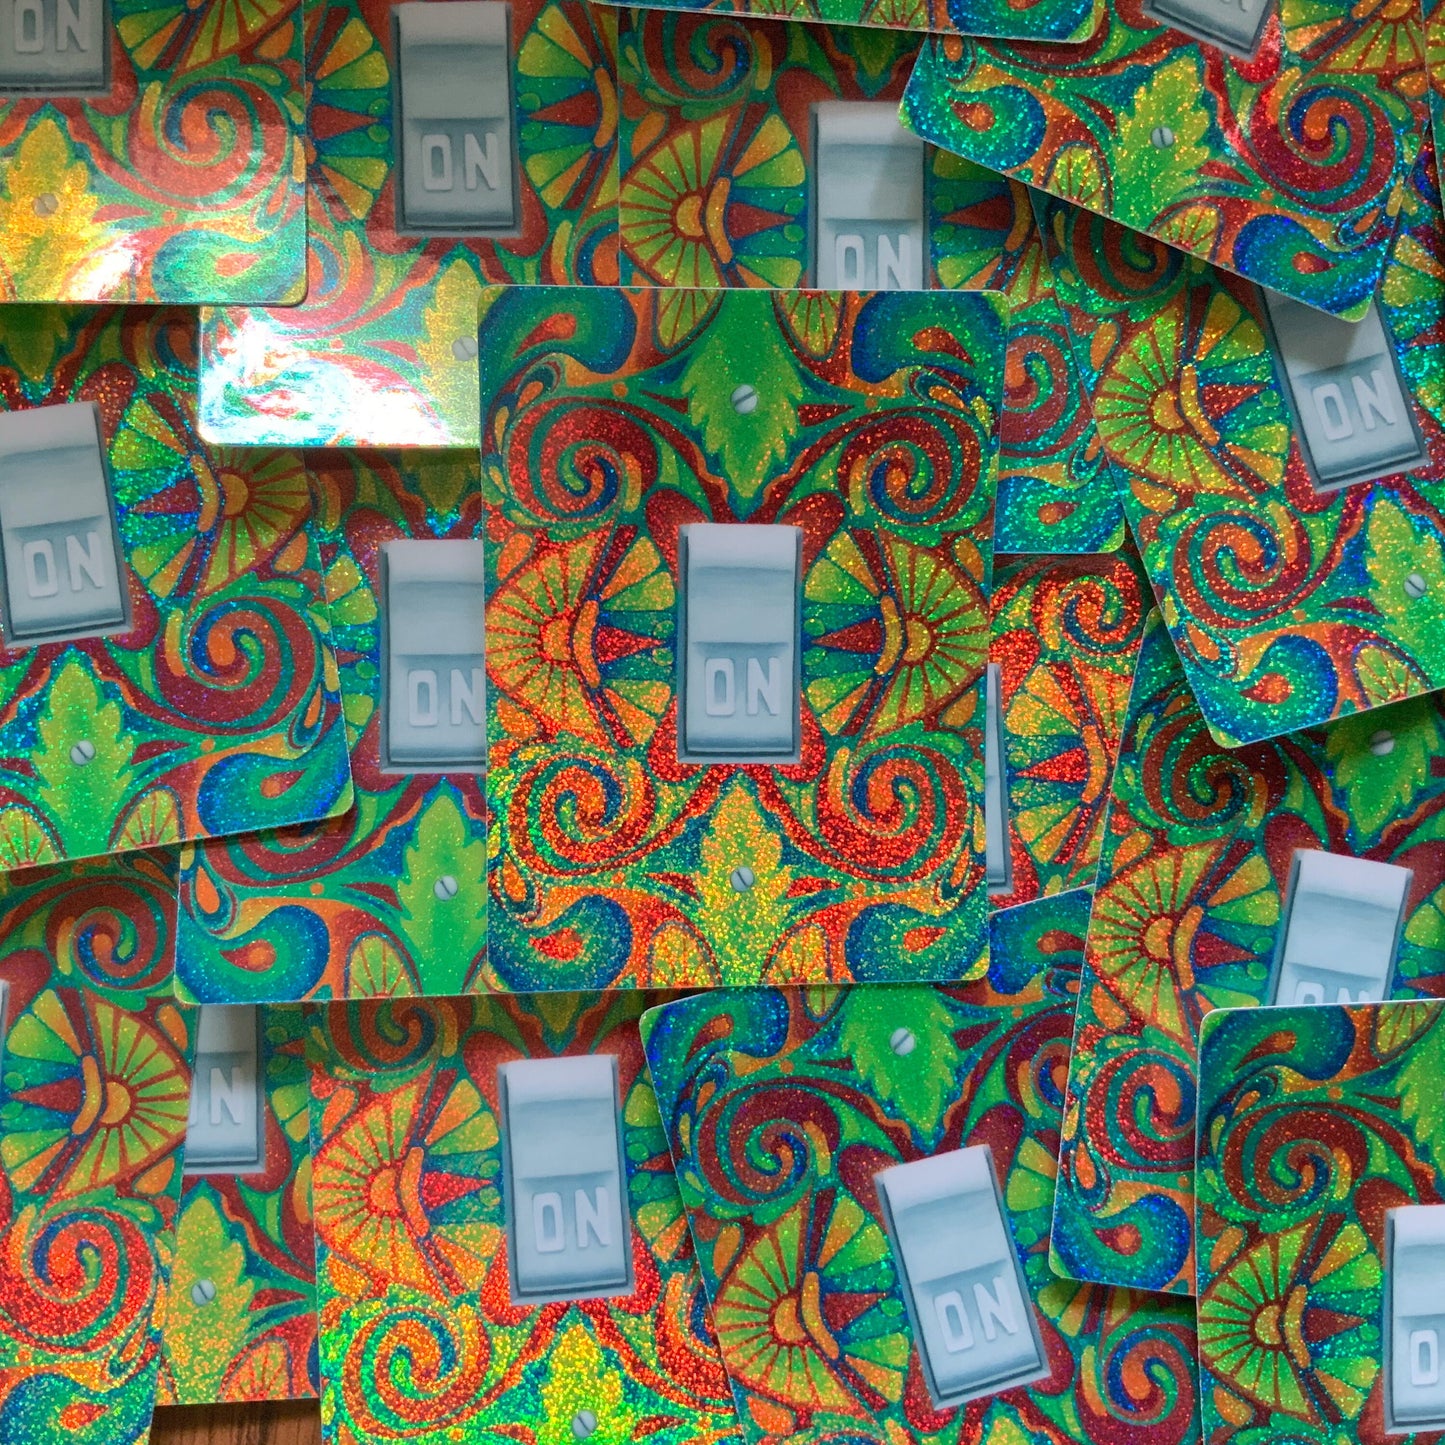 Psychedelic ON Sticker, DECO